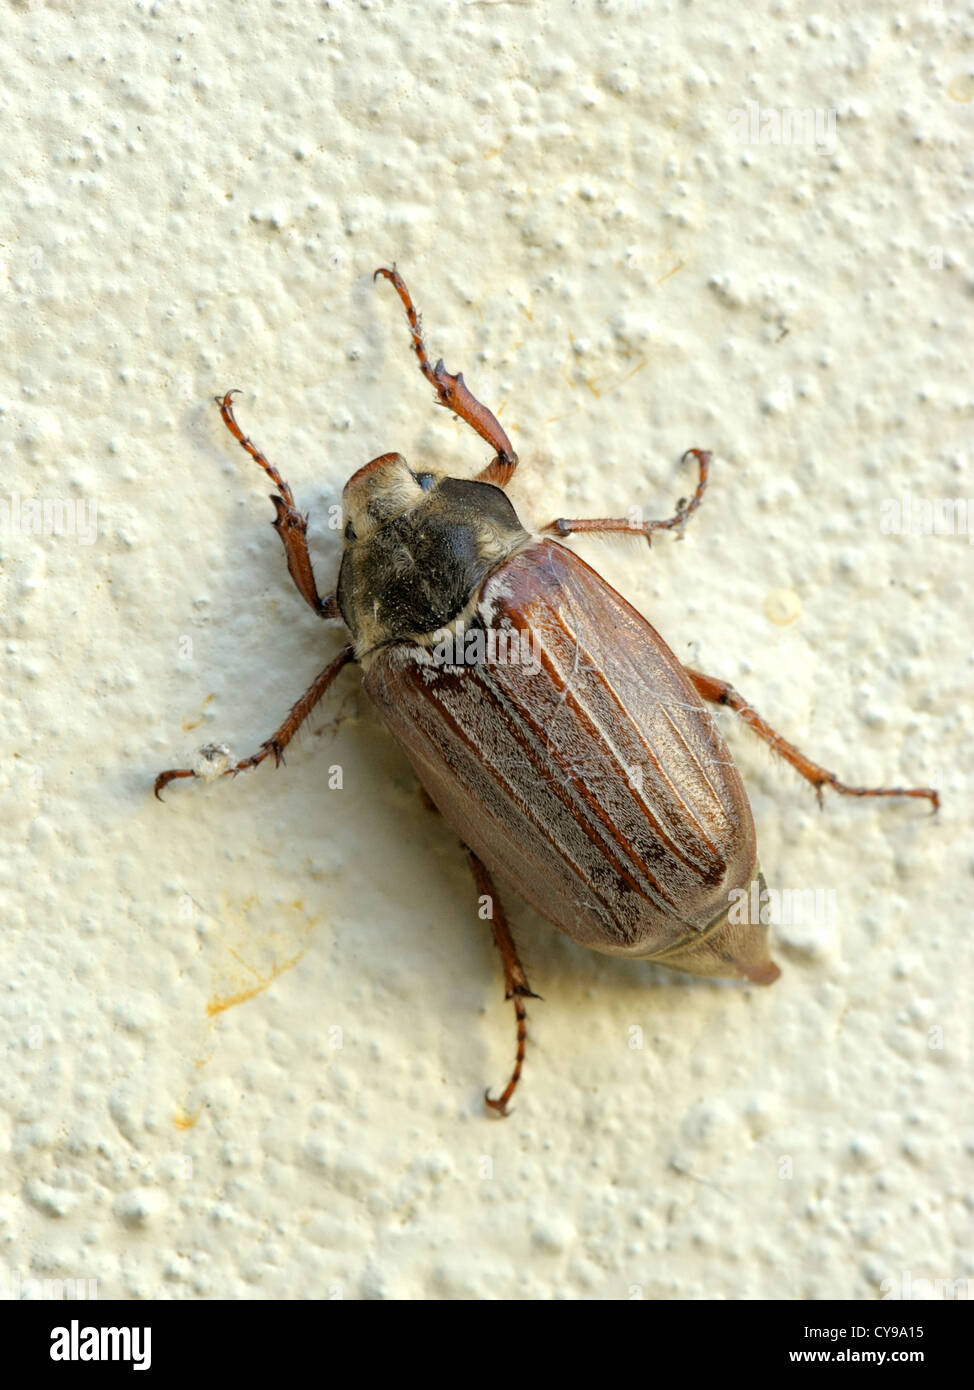 Cockchafer or May Bug, Melolontha melolontha Stock Photo